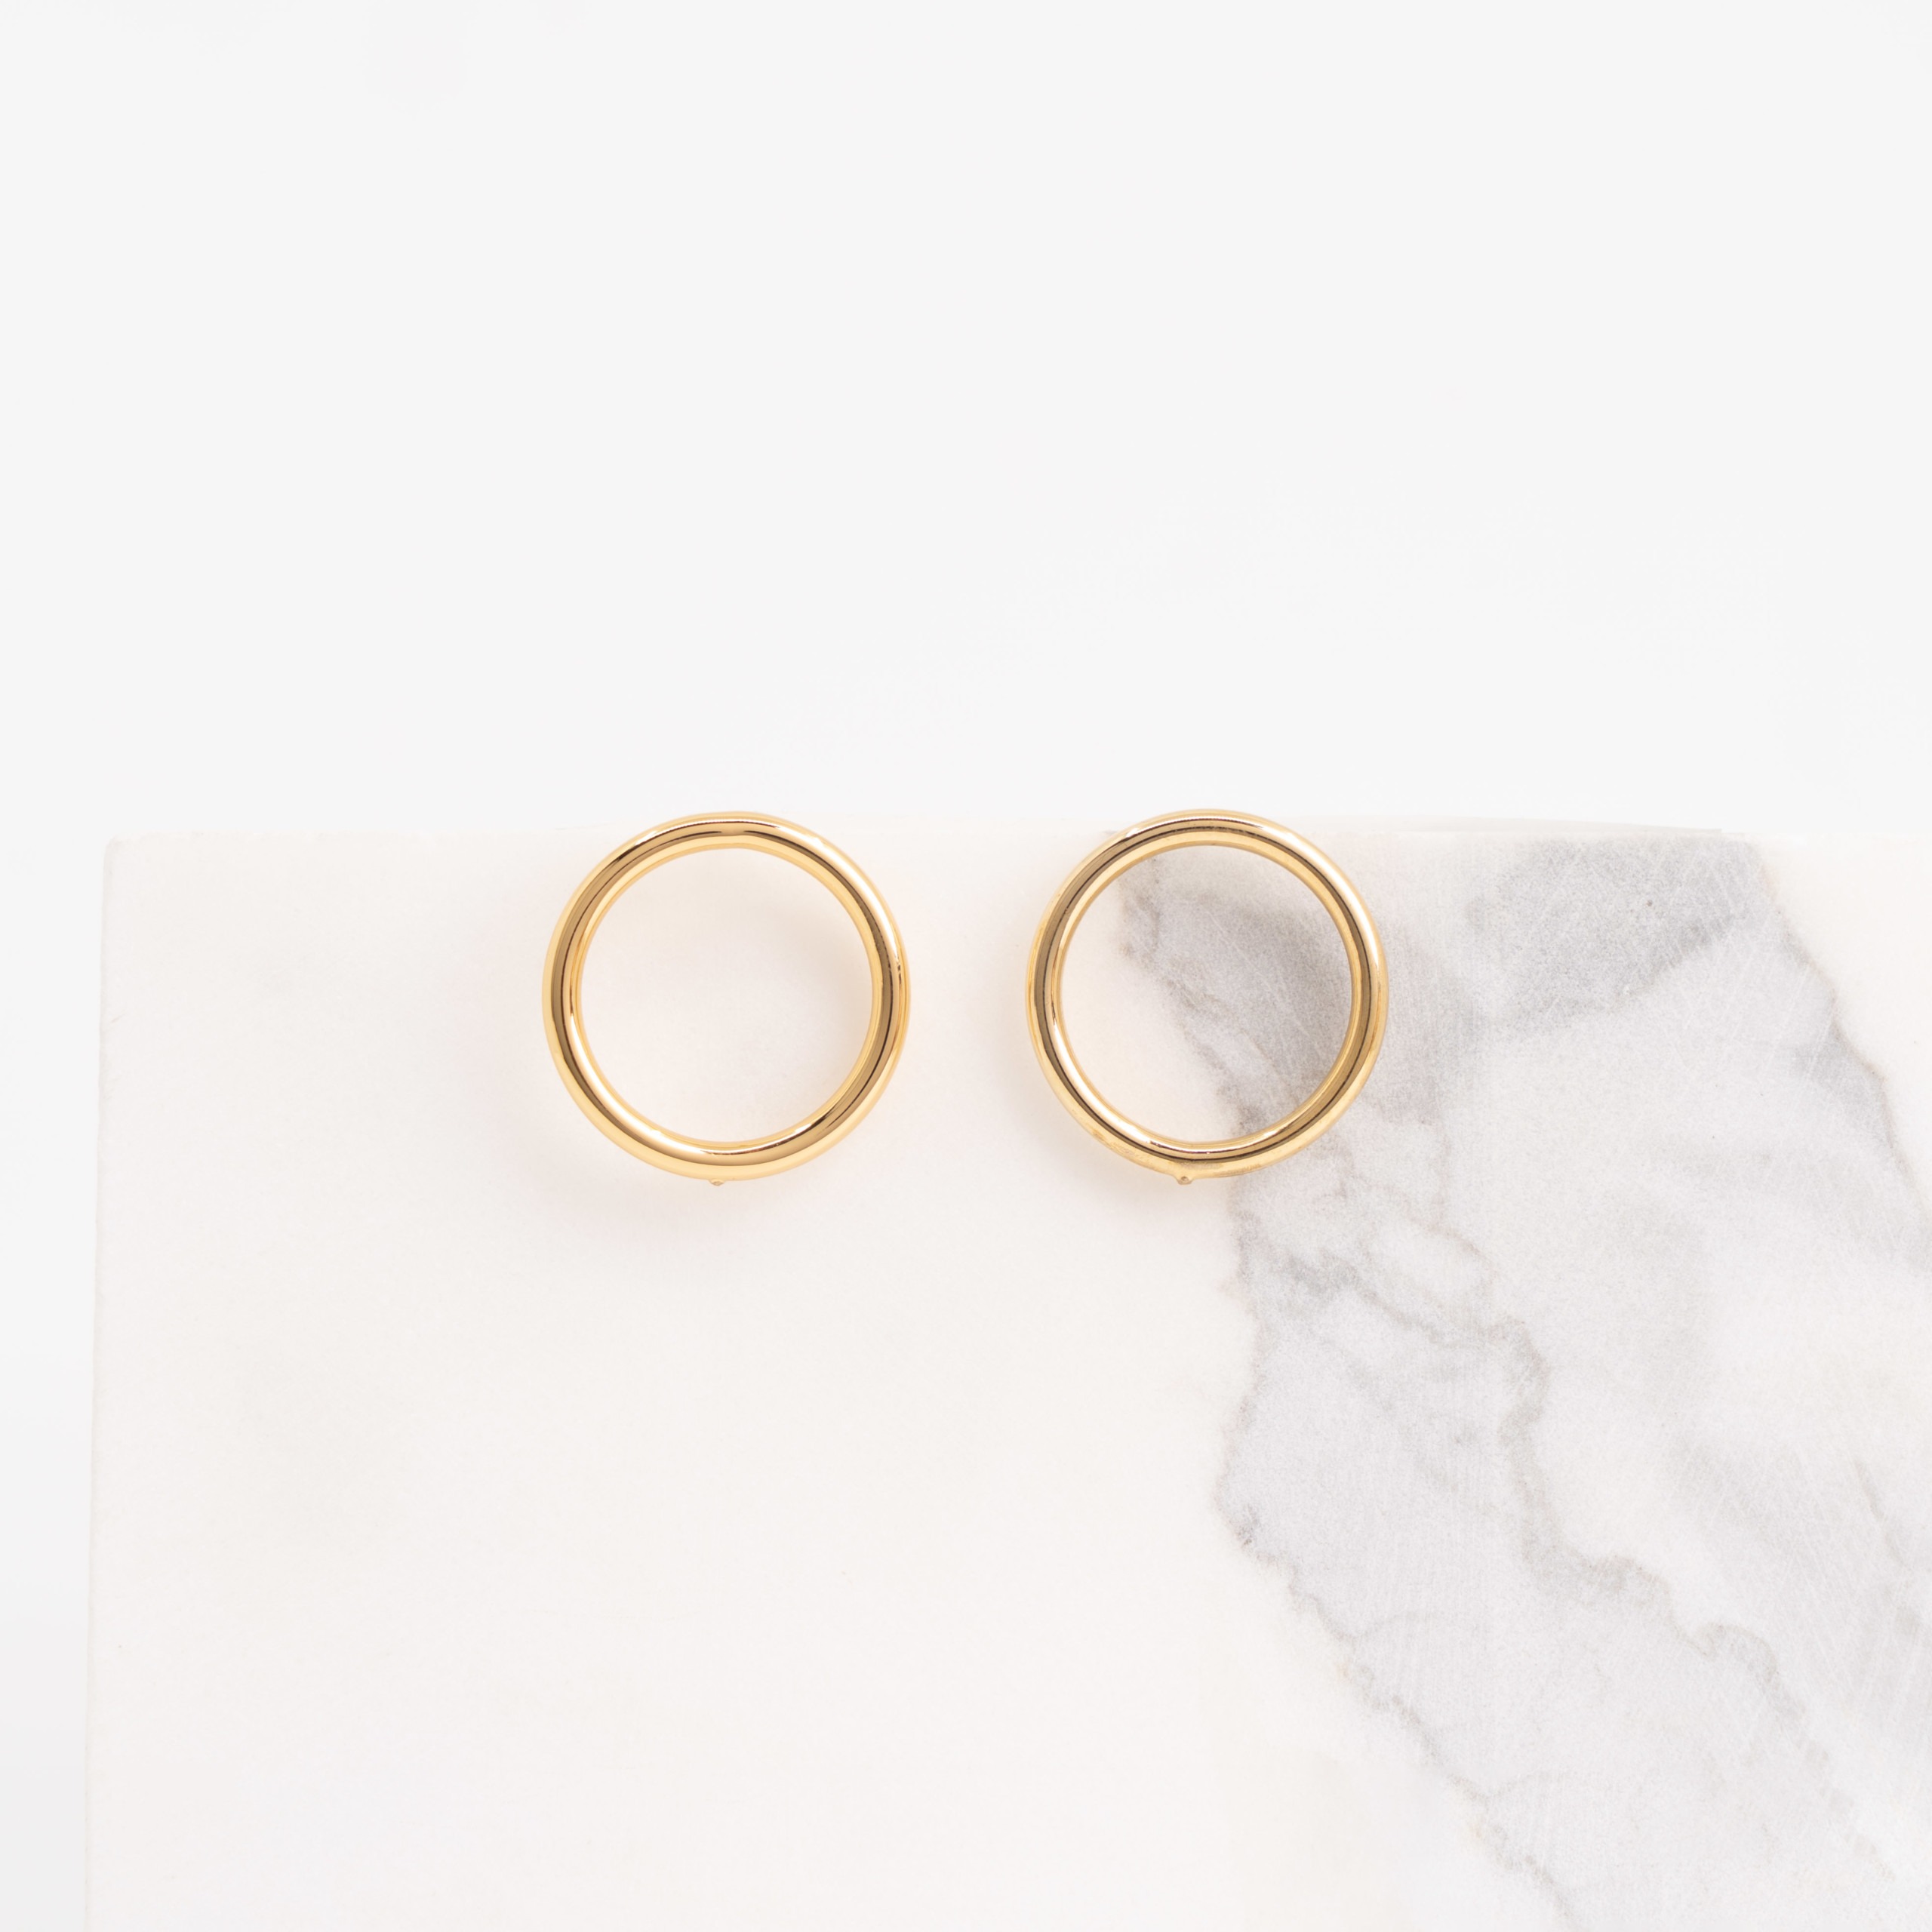 Circle of love gold earrings